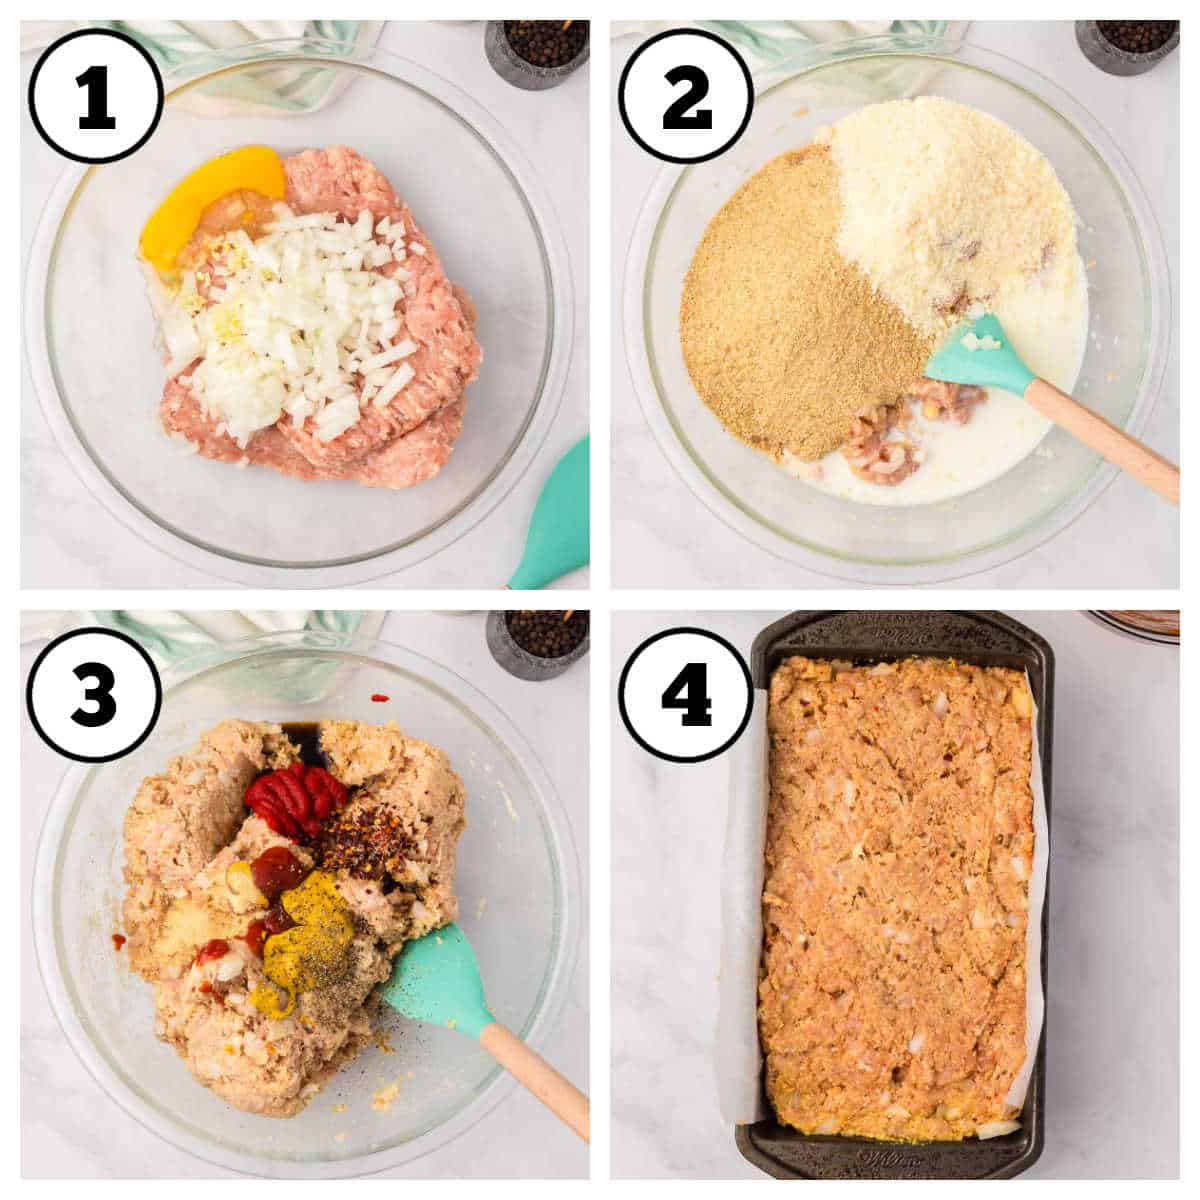 Steps 1-4 of how to make chicken meatloaf.